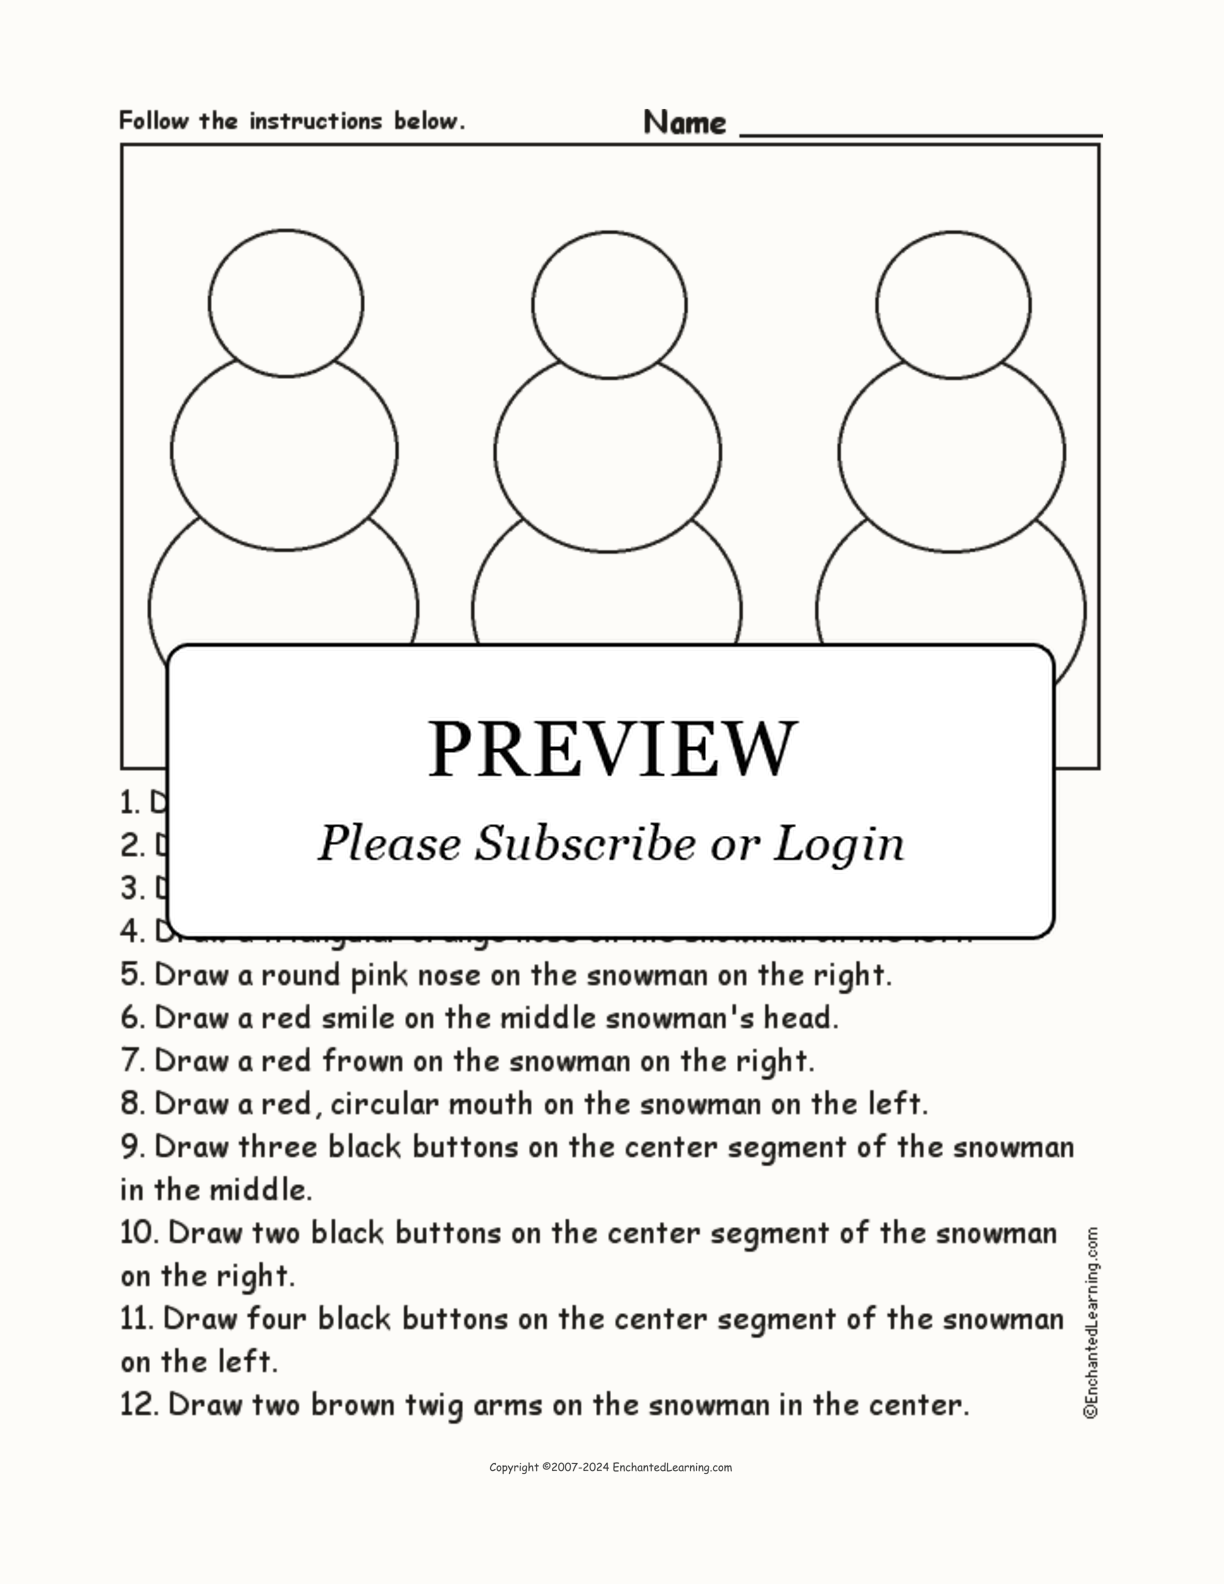 Snowman #2 - Follow the Instructions interactive worksheet page 1